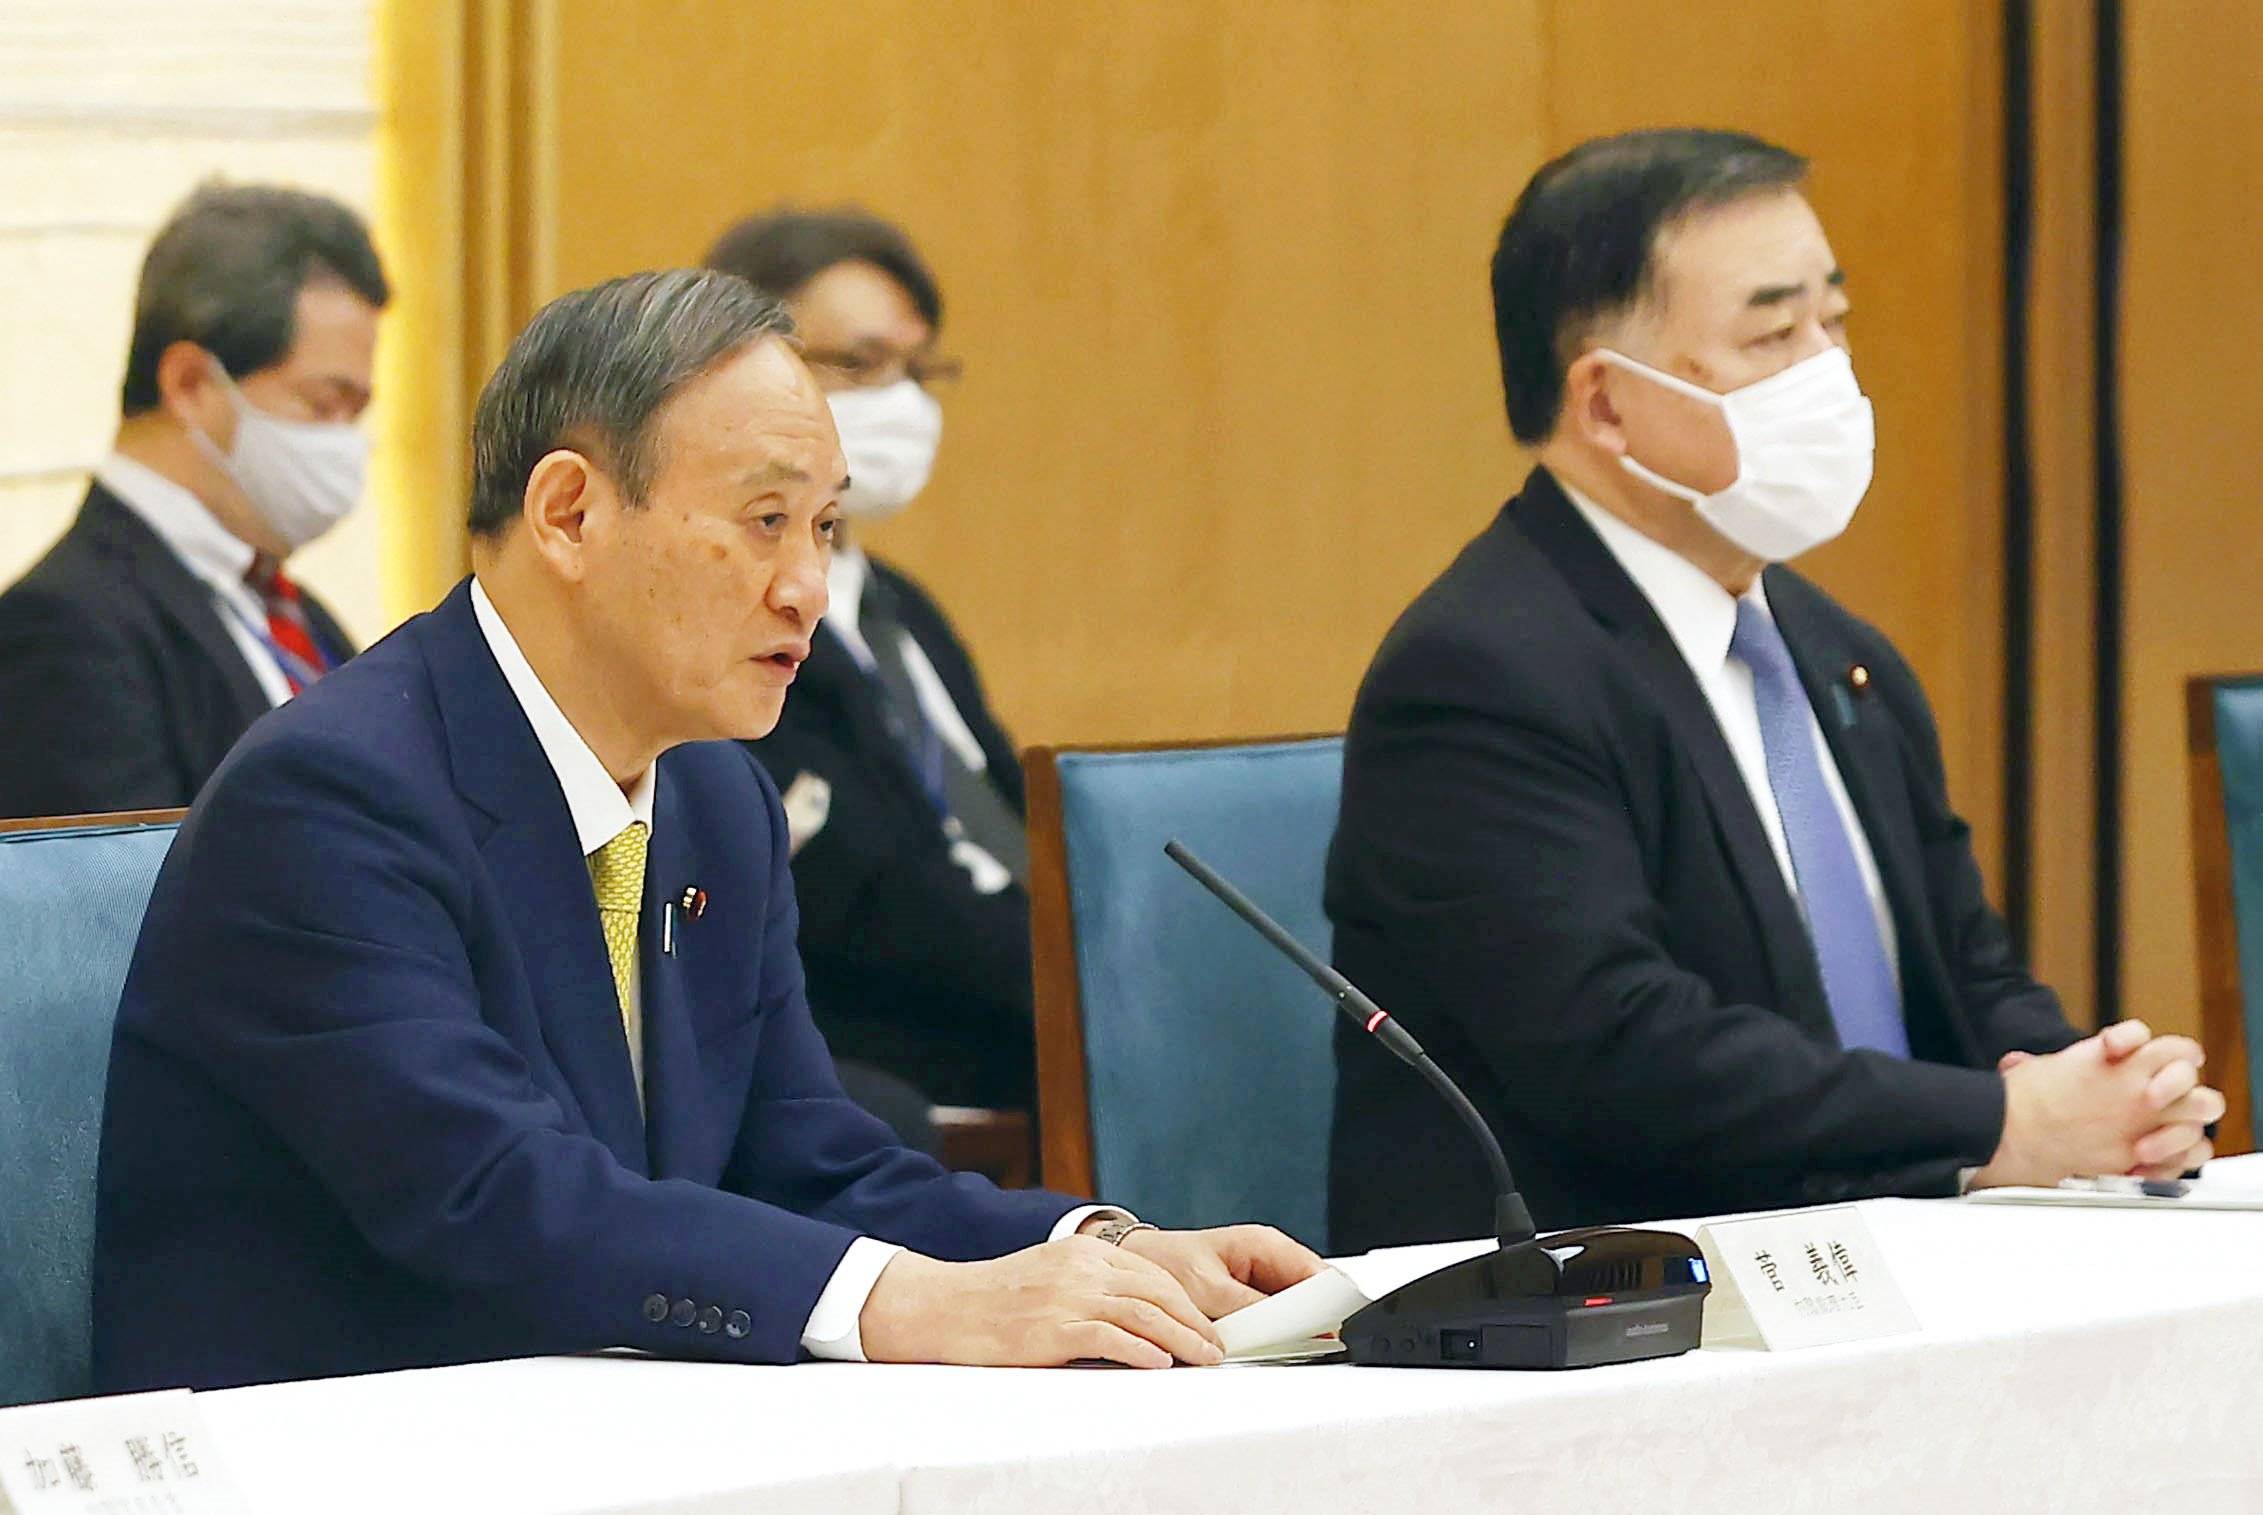 Prime Minister Yoshihide Suga speaks at a meeting of Cabinet ministers on additional spending for COVID-19 measures on Tuesday. | KYODO